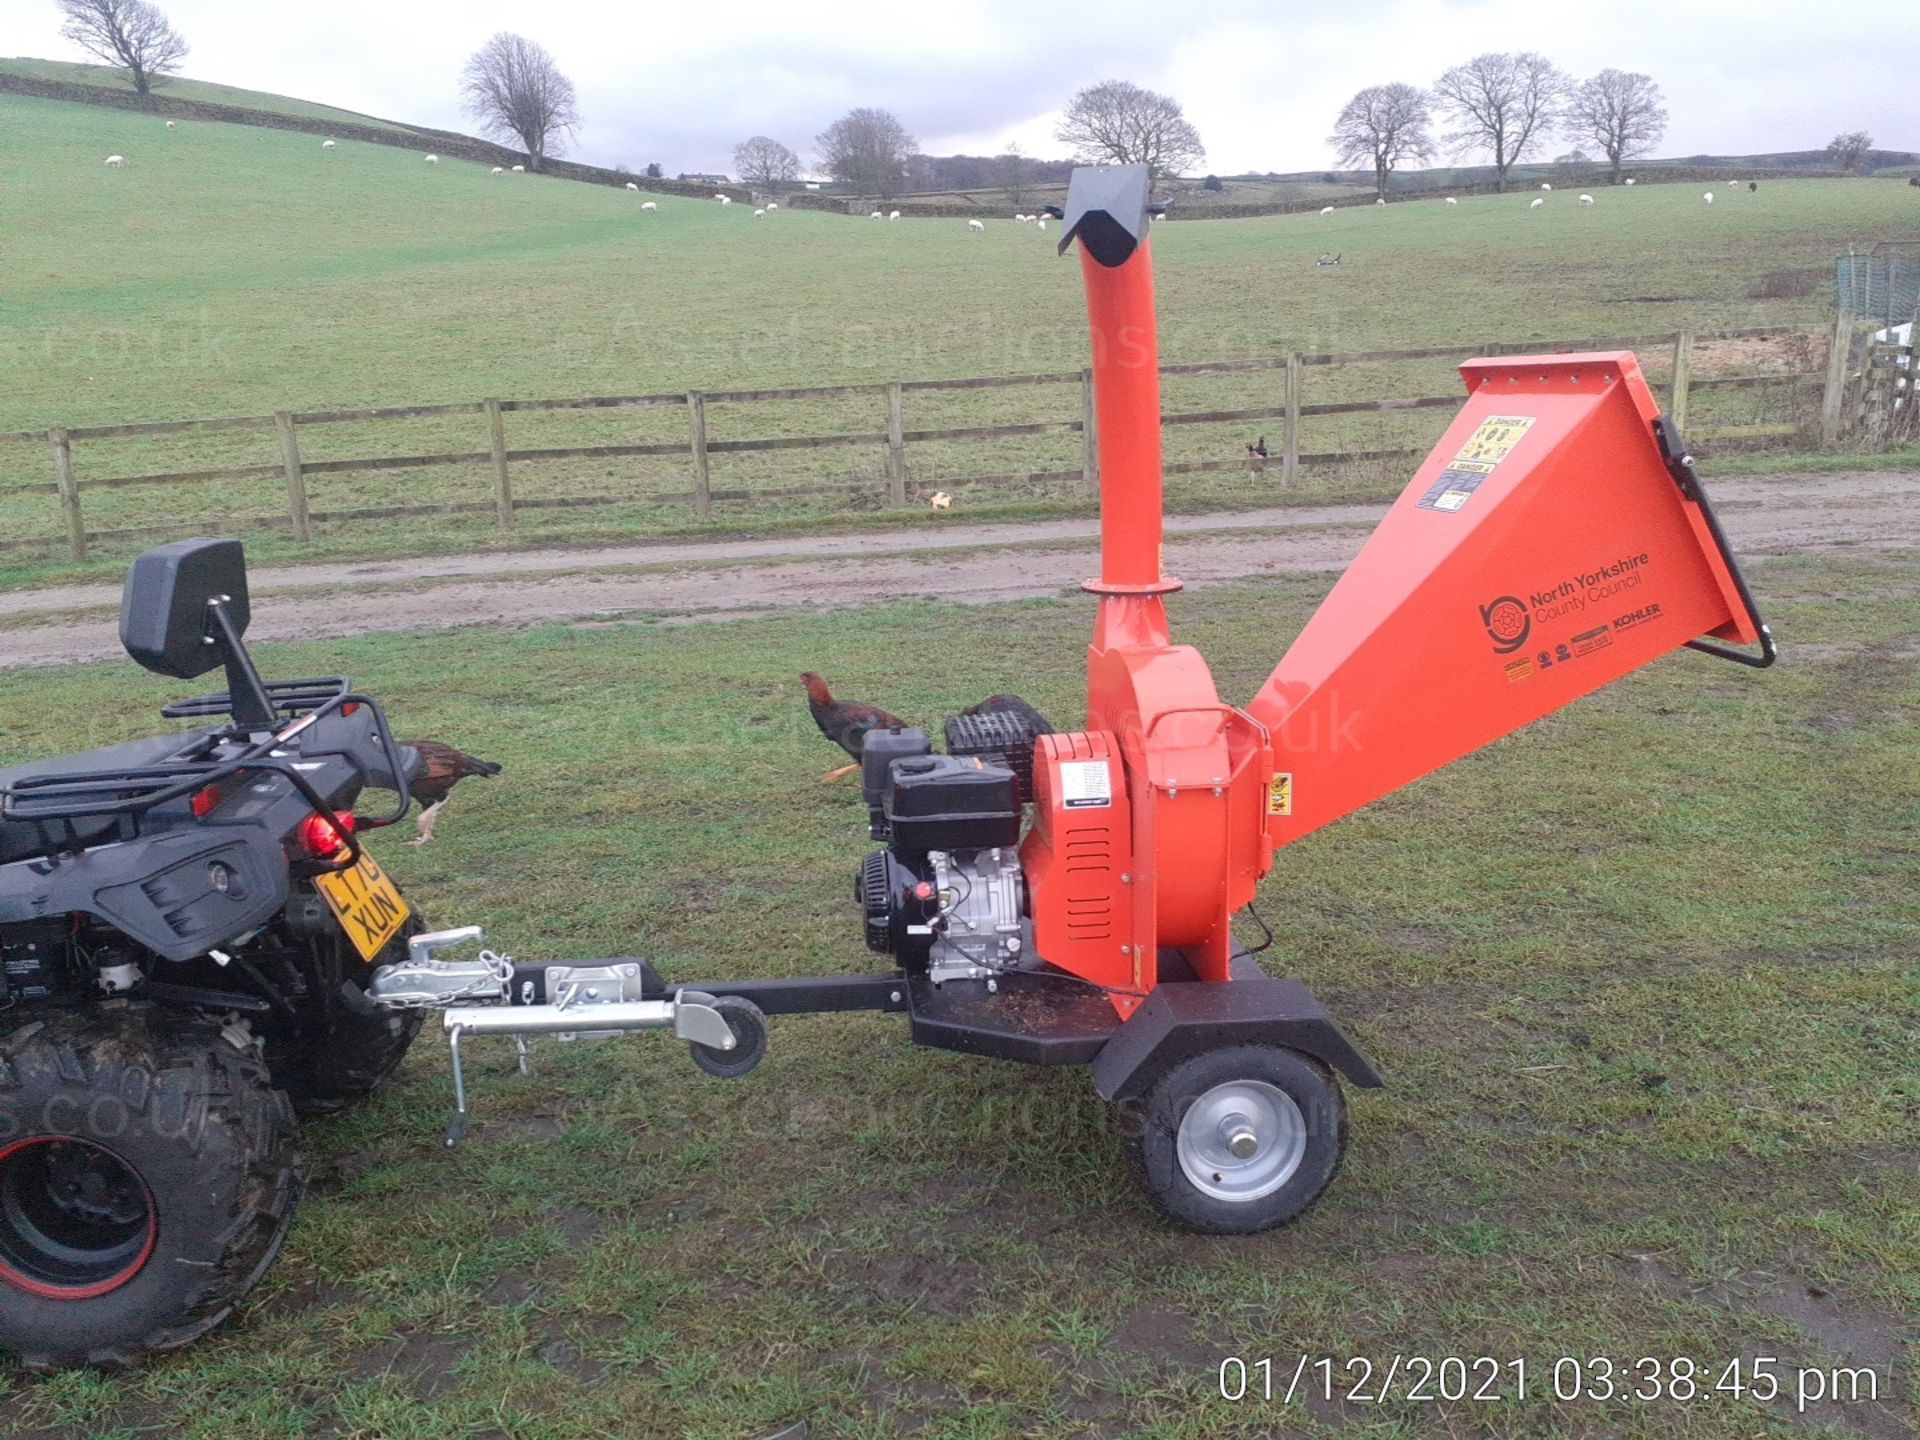 420cc Wood Chipper - BRAND NEW, comes with LED Rear light pack and numberplate holder *PLUS VAT* - Image 6 of 10